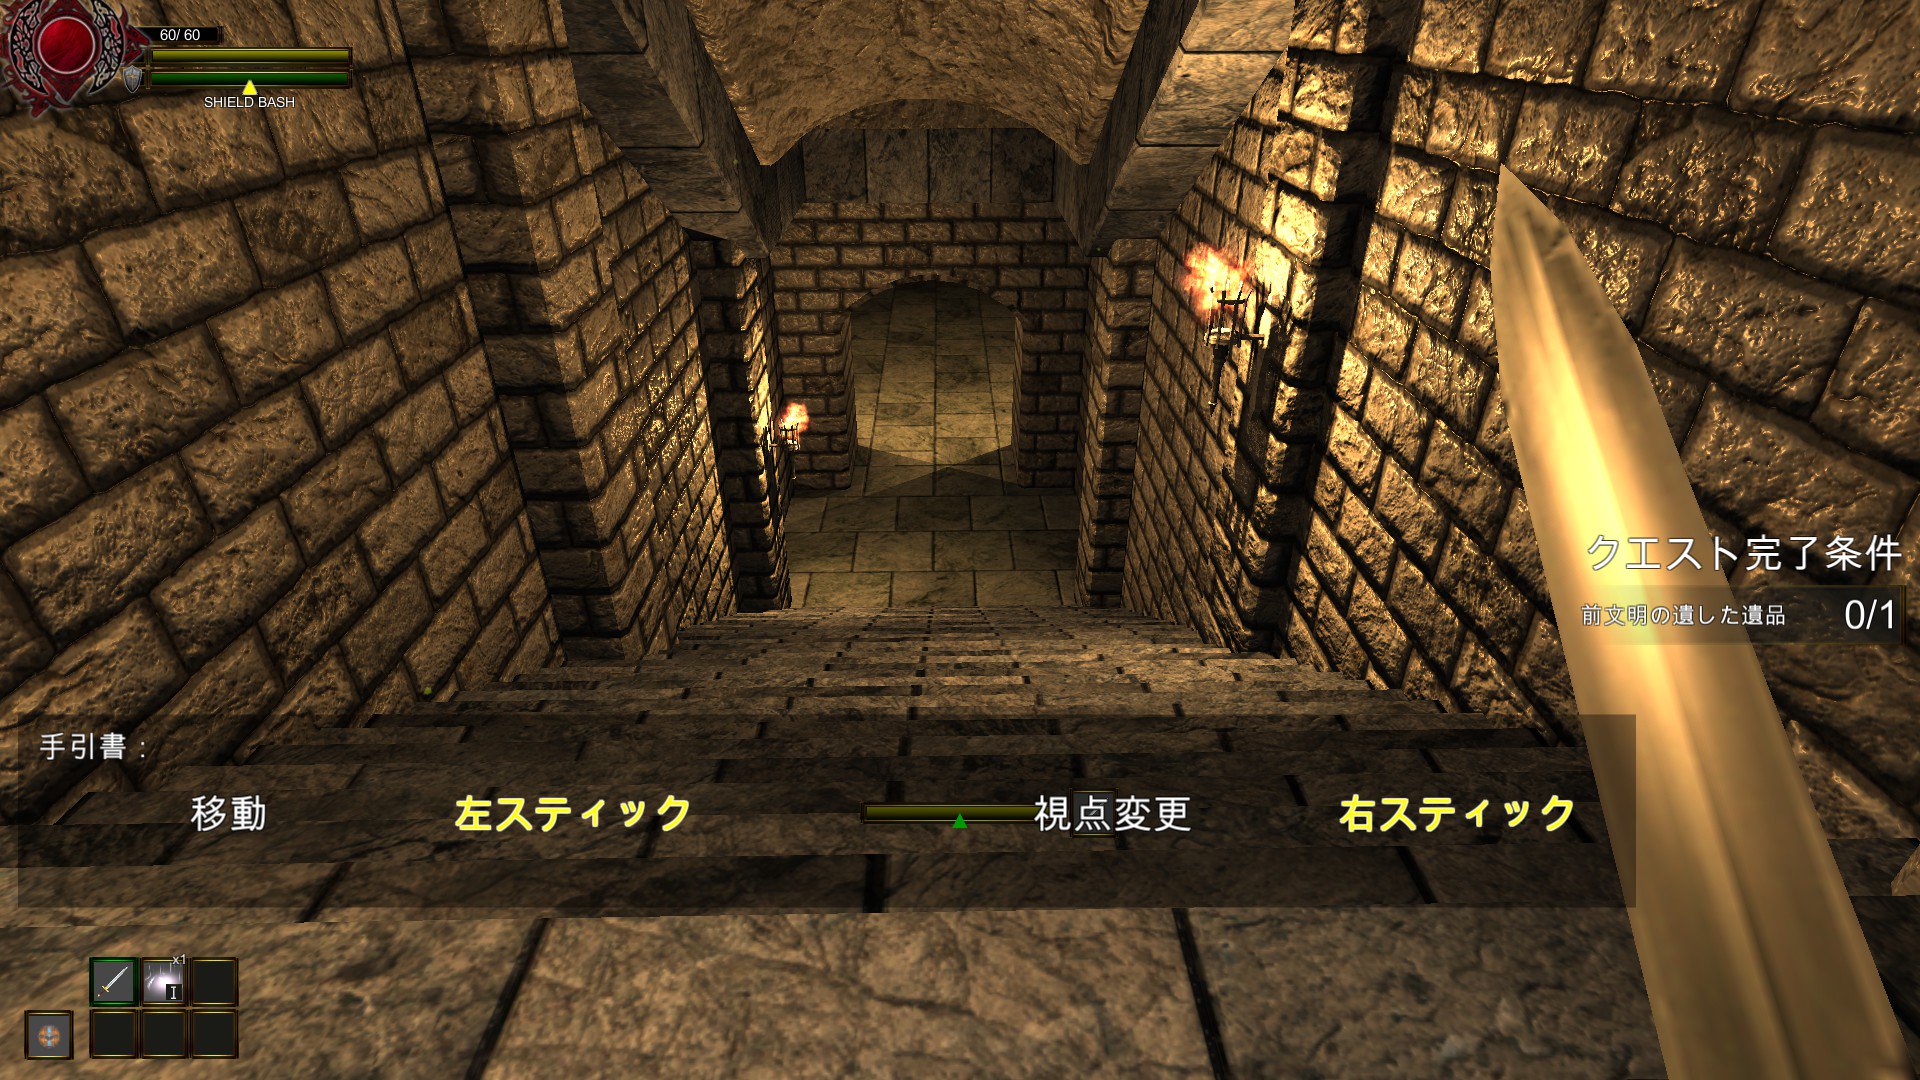 Twitter 上的 Playism 一人称ダンジョン探索型アクションrpg Dungeons Darkness 配信開始まで残り約1時間 Steam T Co Bthuh4airq Playism T Co L6wxp1tcyr T Co Ftbcofeif5 Twitter